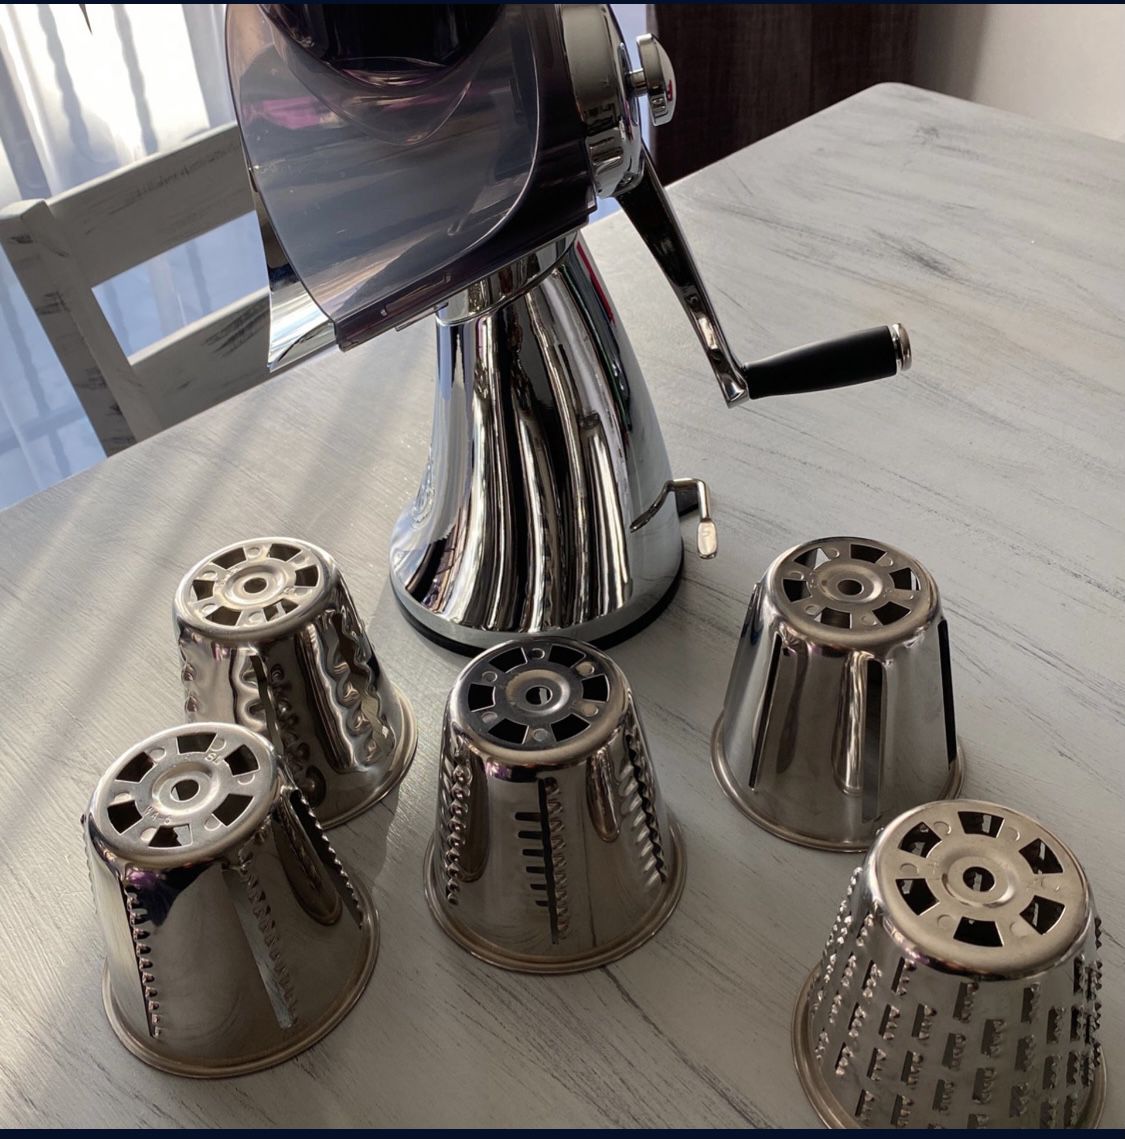 Royal Prestige Chocolate Maker for Sale in Hastings Hdsn, NY - OfferUp